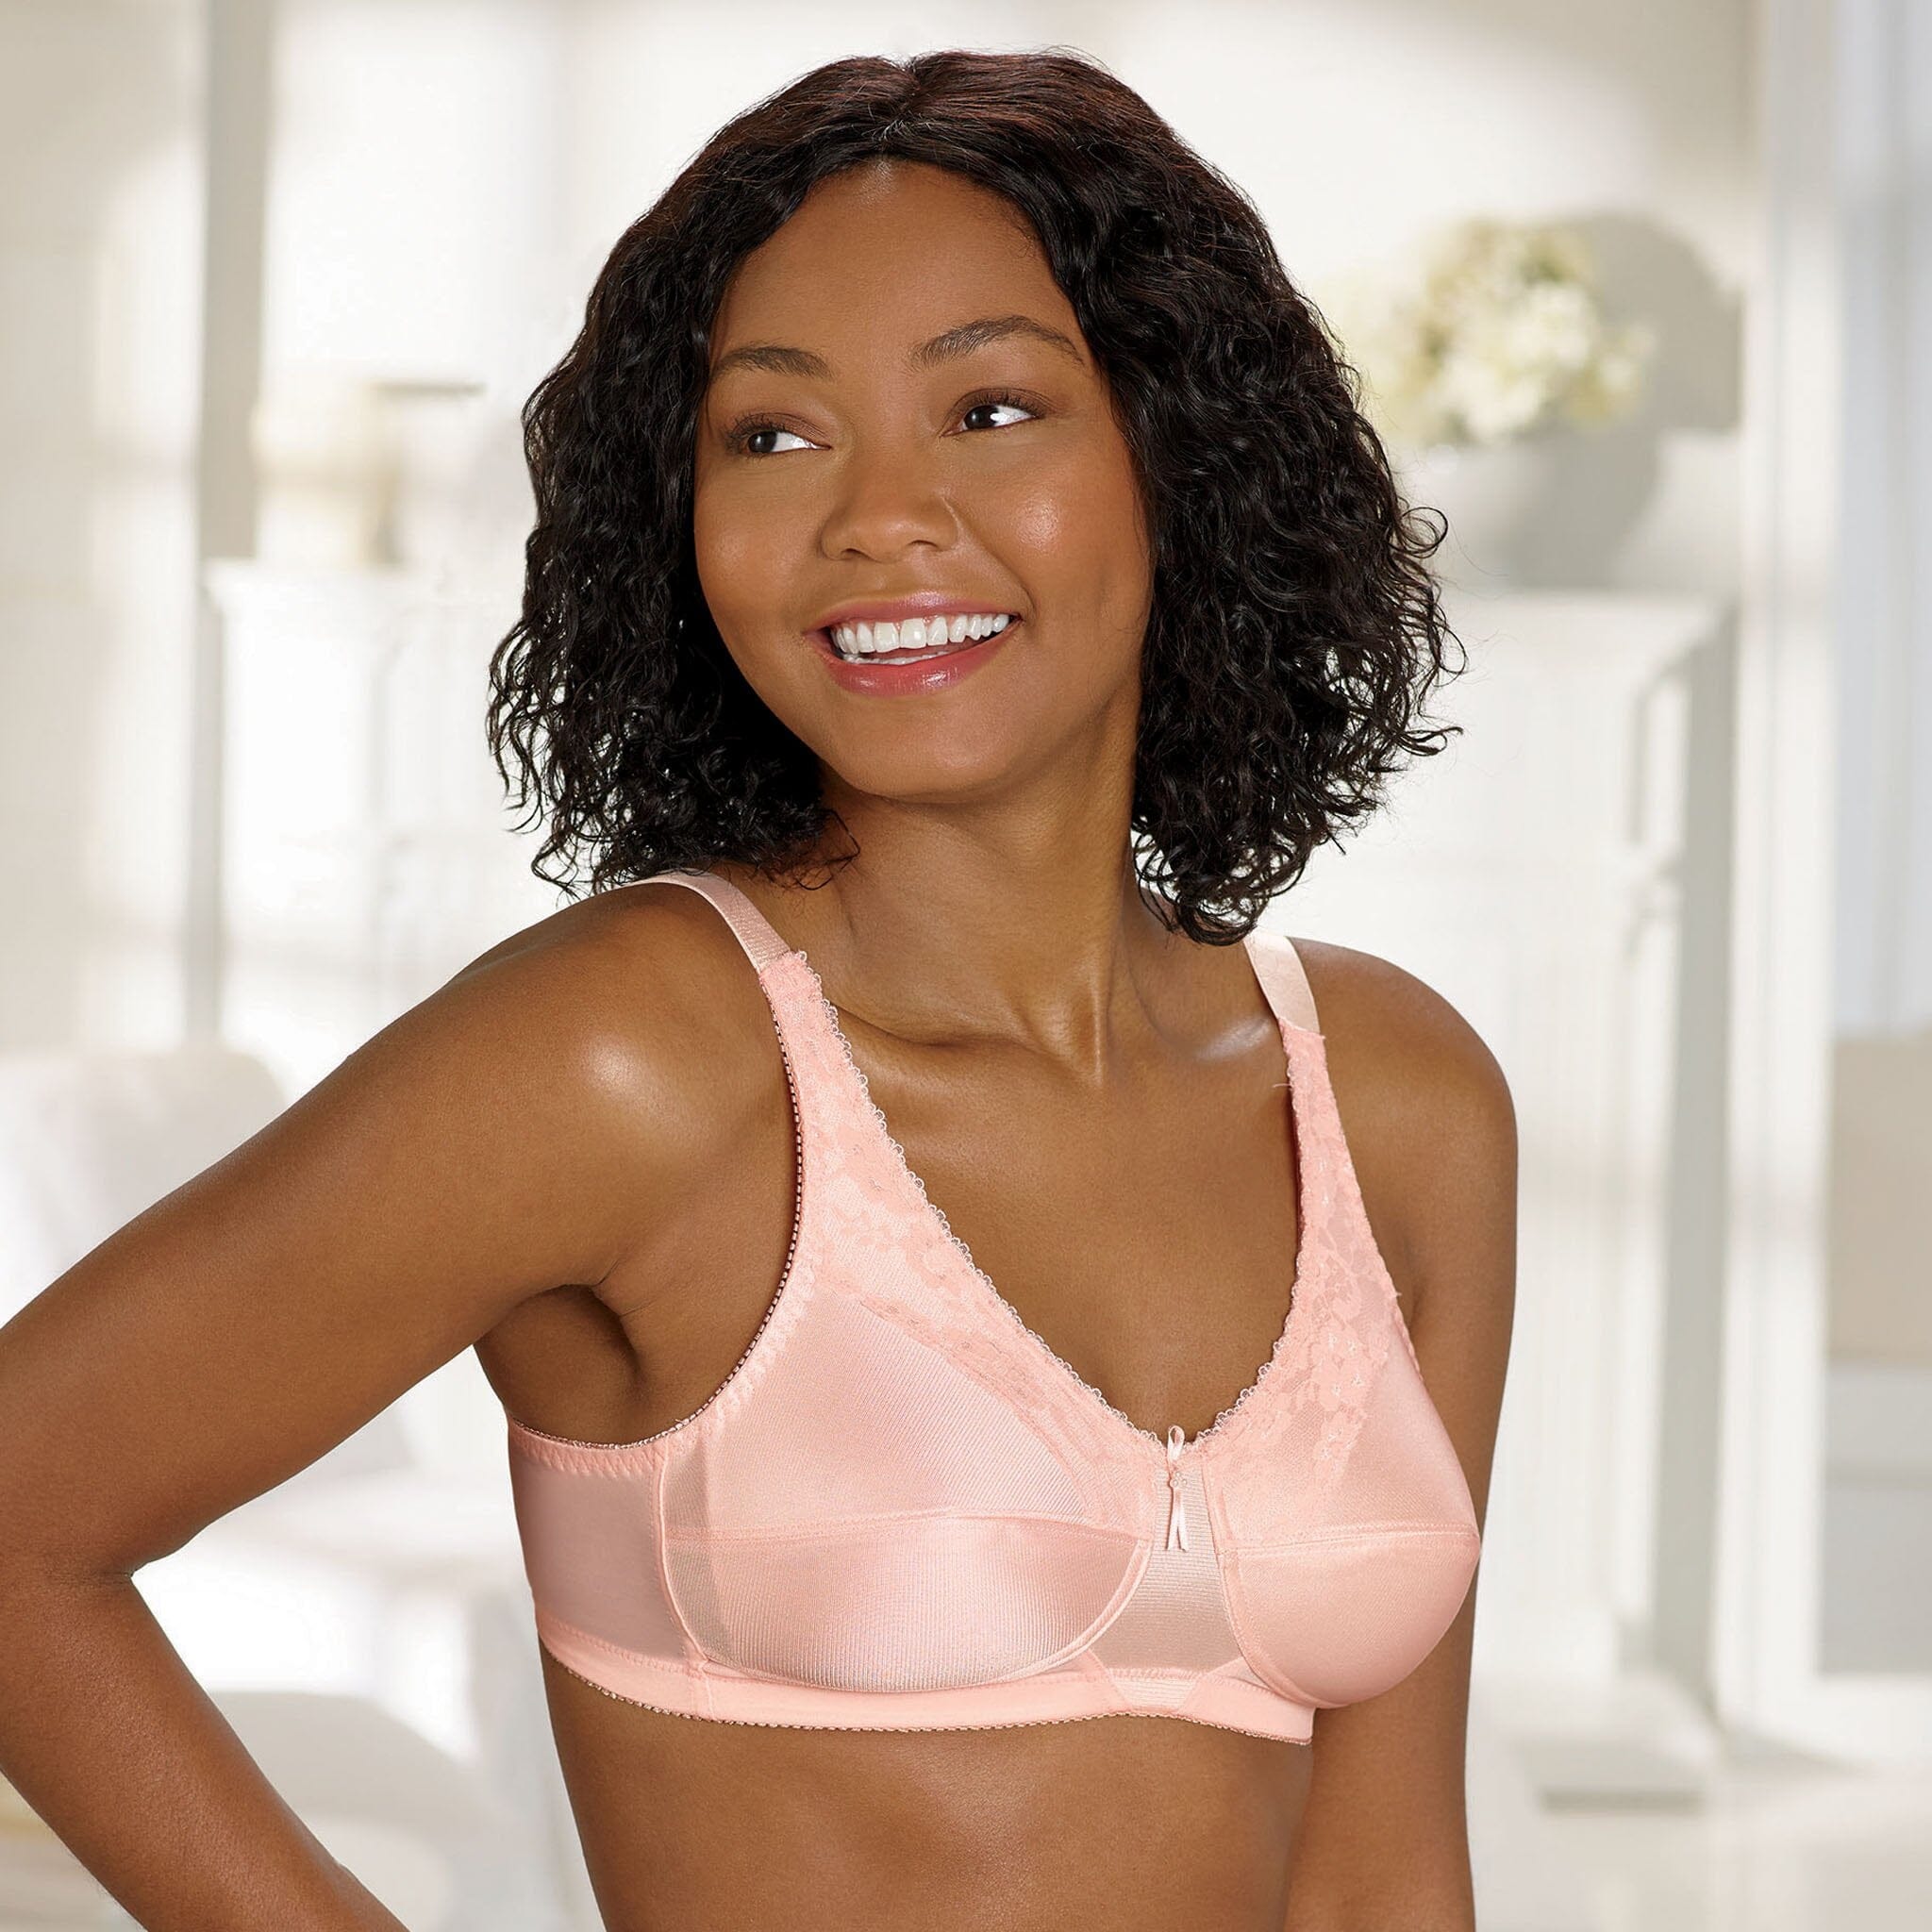 Lace underwired bra with reinforced cups